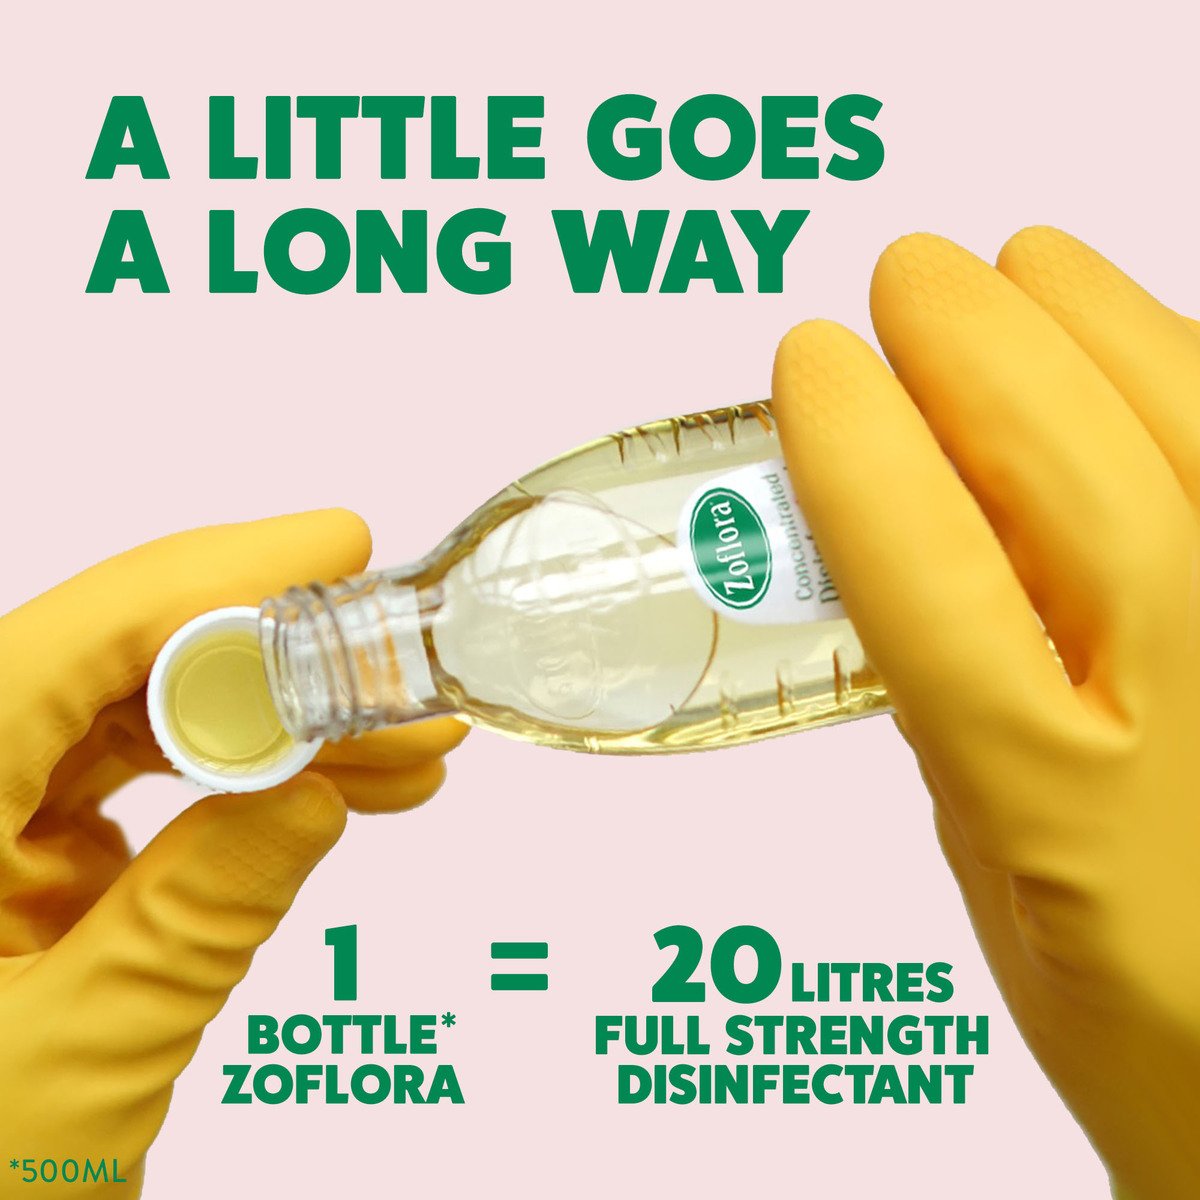 Zoflora Linen Fresh 3in1 Action Concentrated Disinfectant 500ml